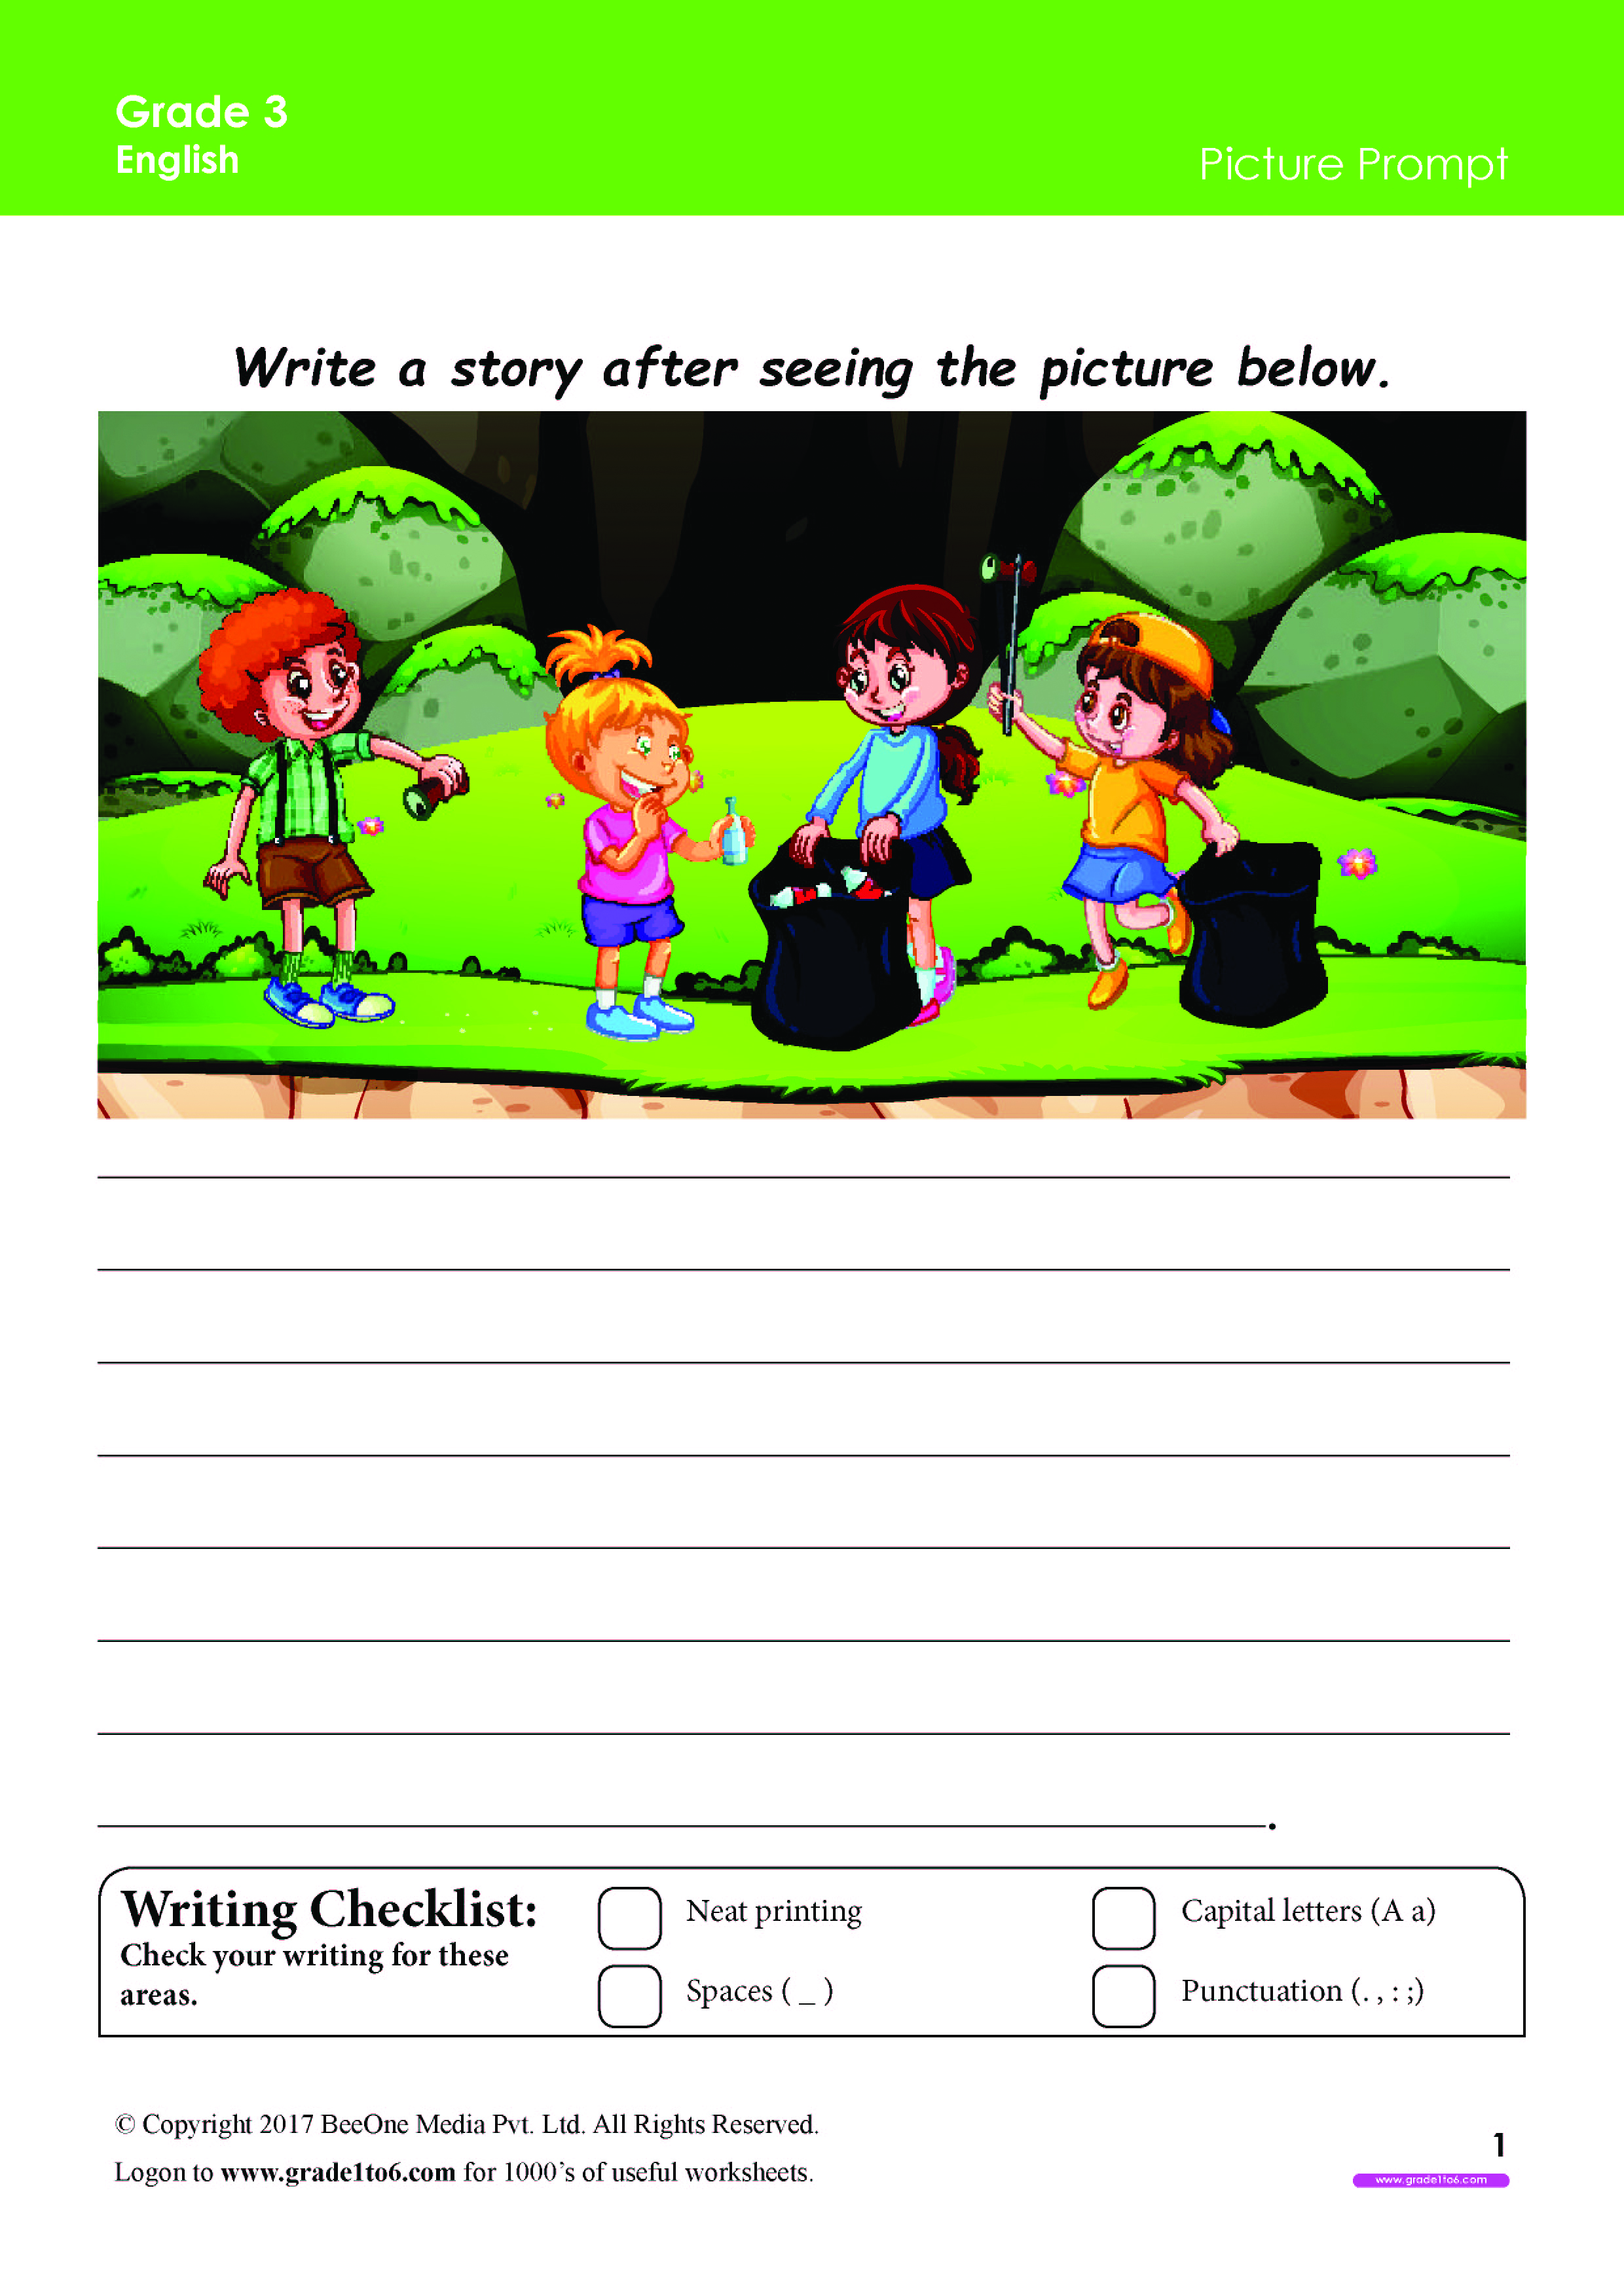 3rd grade picture prompt worksheets www grade1to6 com